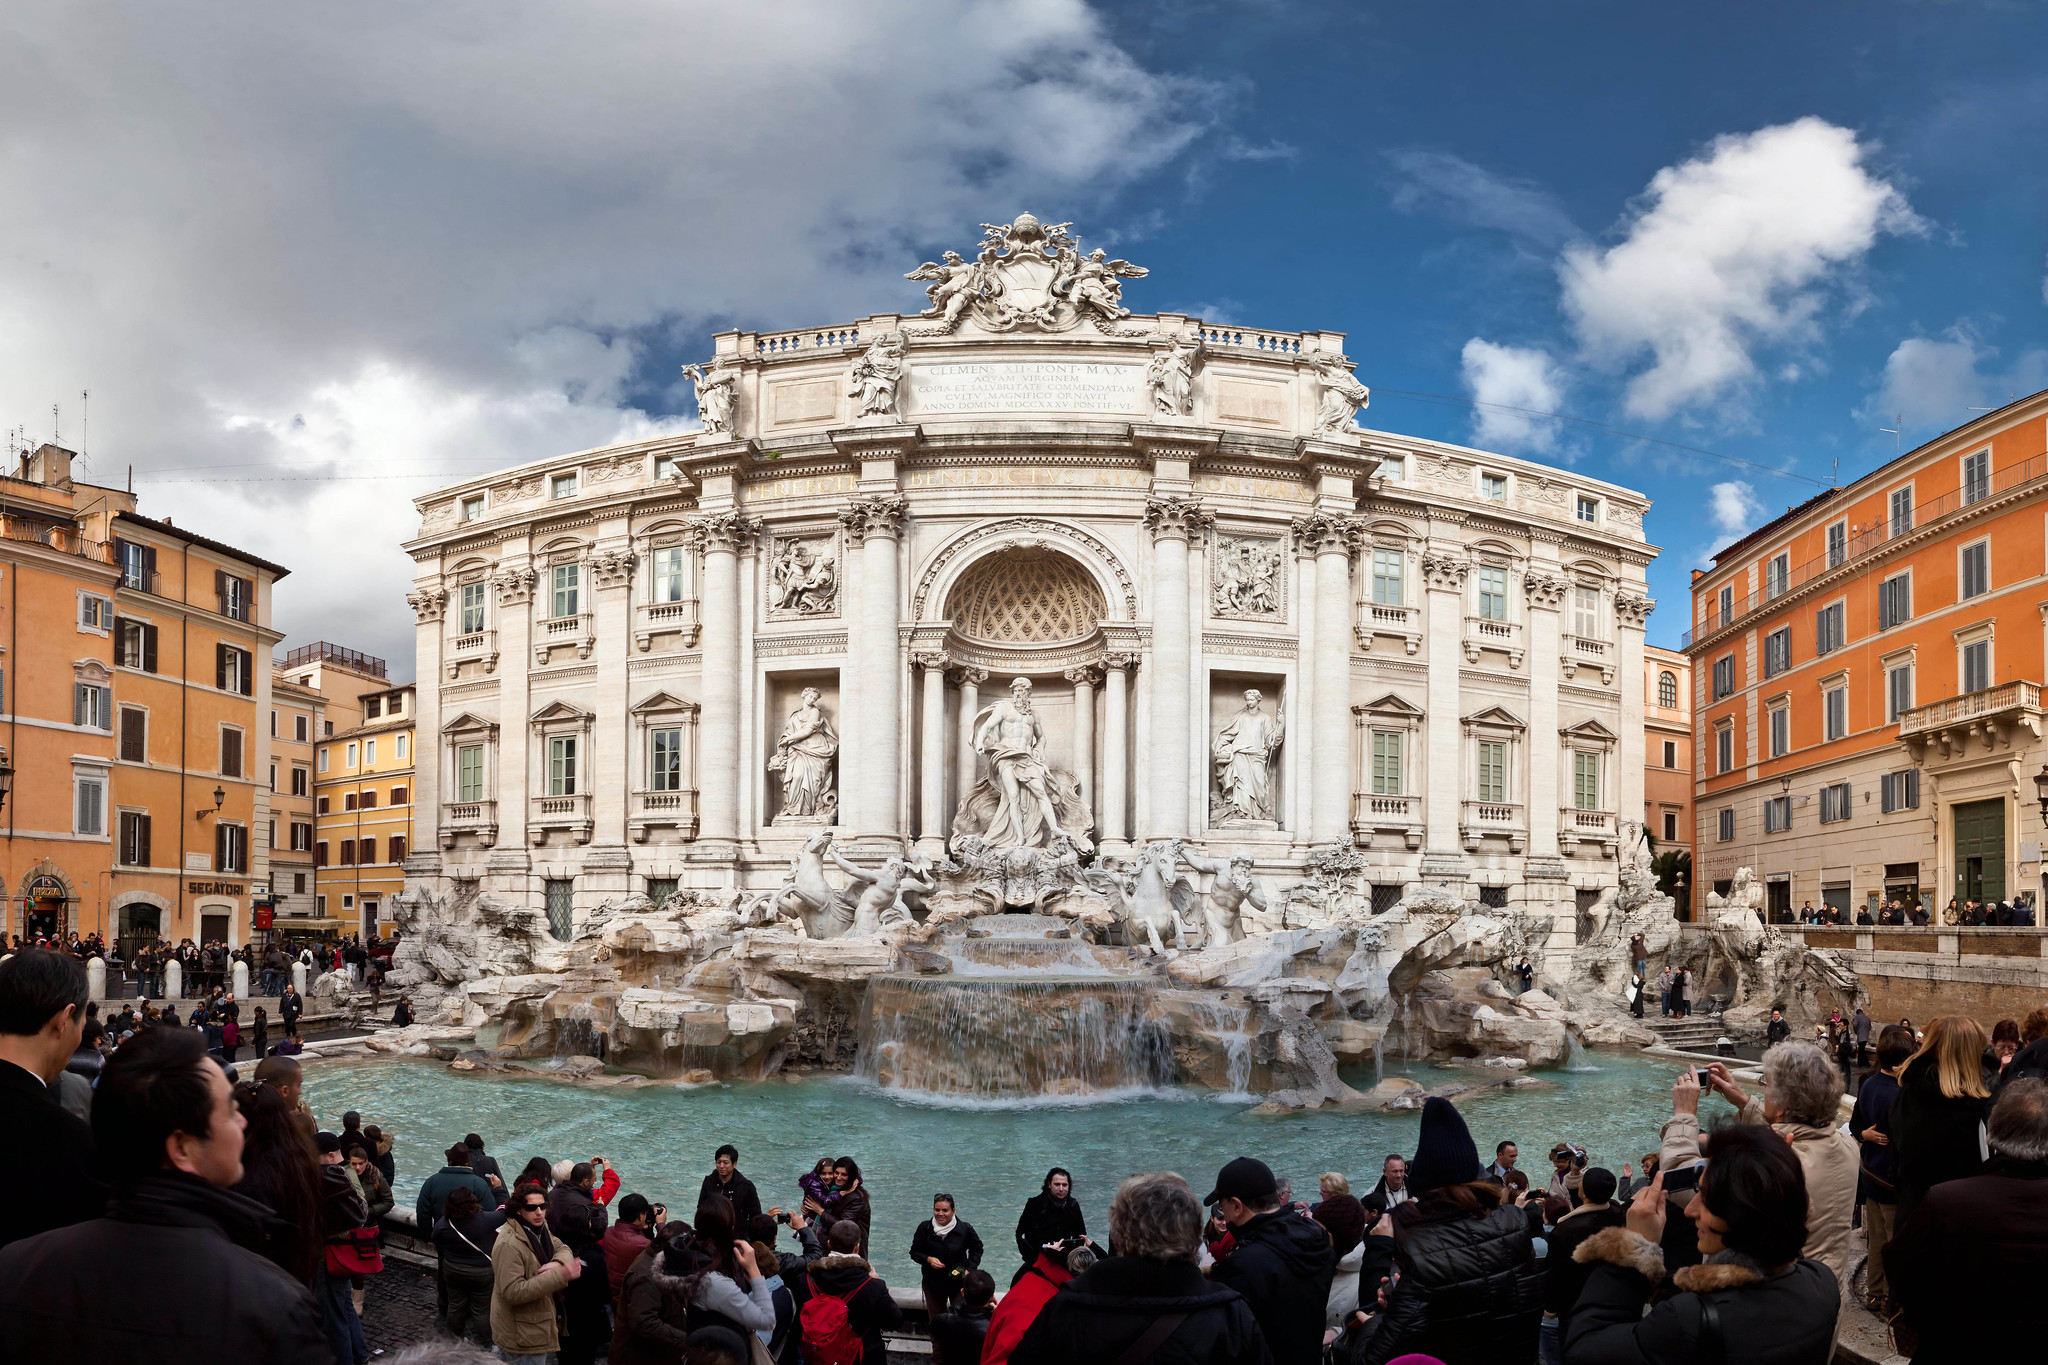 <p>If you're hoping to snap a photo of the Trevi Fountain <strong>be prepared to fight for a spot </strong><strong>along the railing</strong><strong>.</strong> No matter where you look, there will be people trying to take selfies. Because of all the hubbub and crowding, you'll be lucky to get that perfect photo you were hoping for.</p>